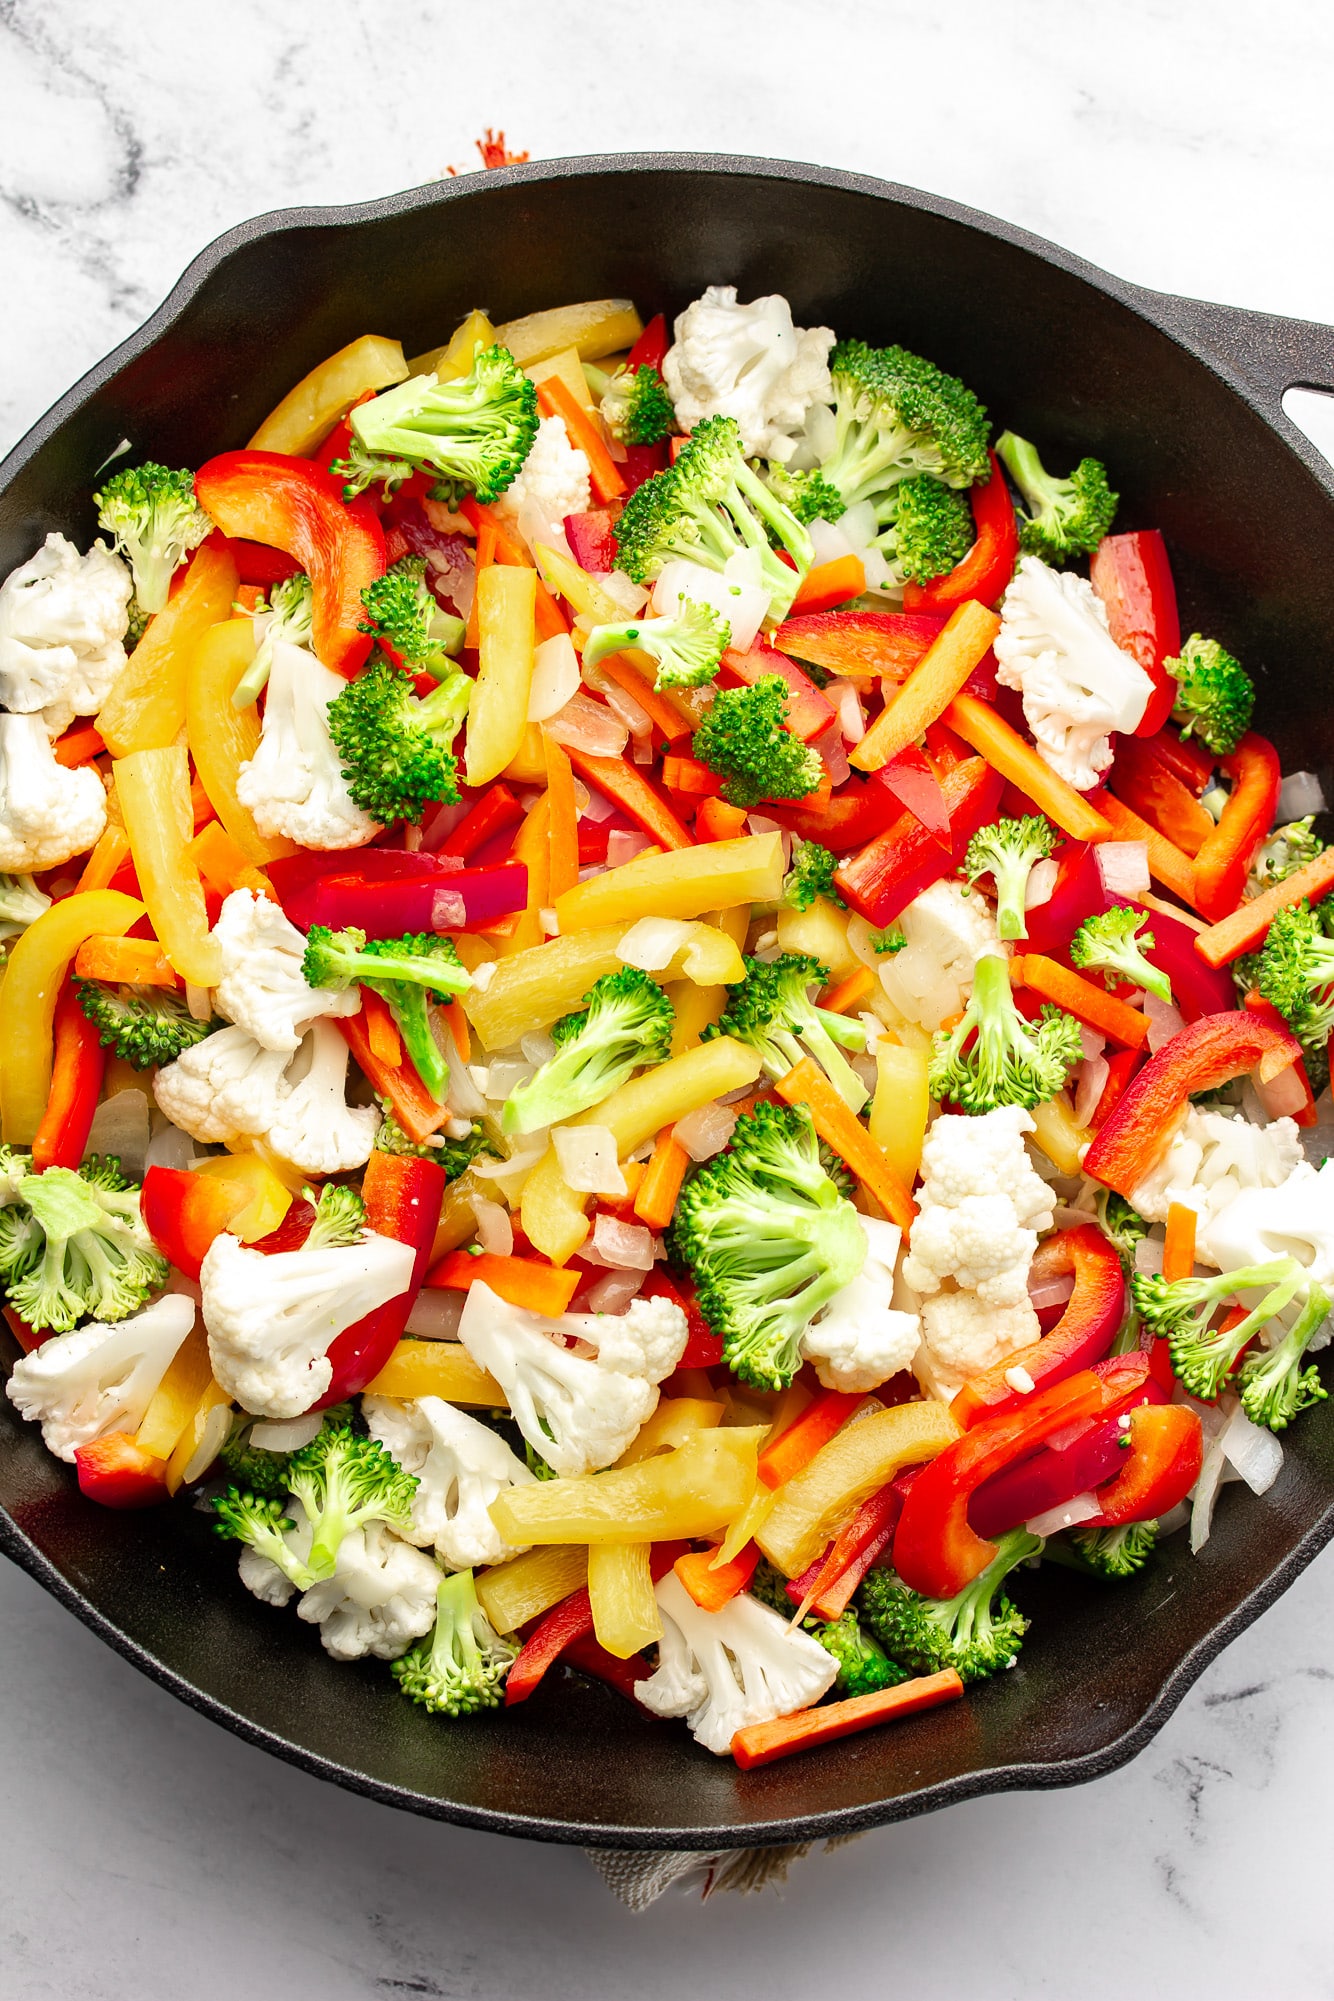 cooking chopped vegetables in a black skillet.